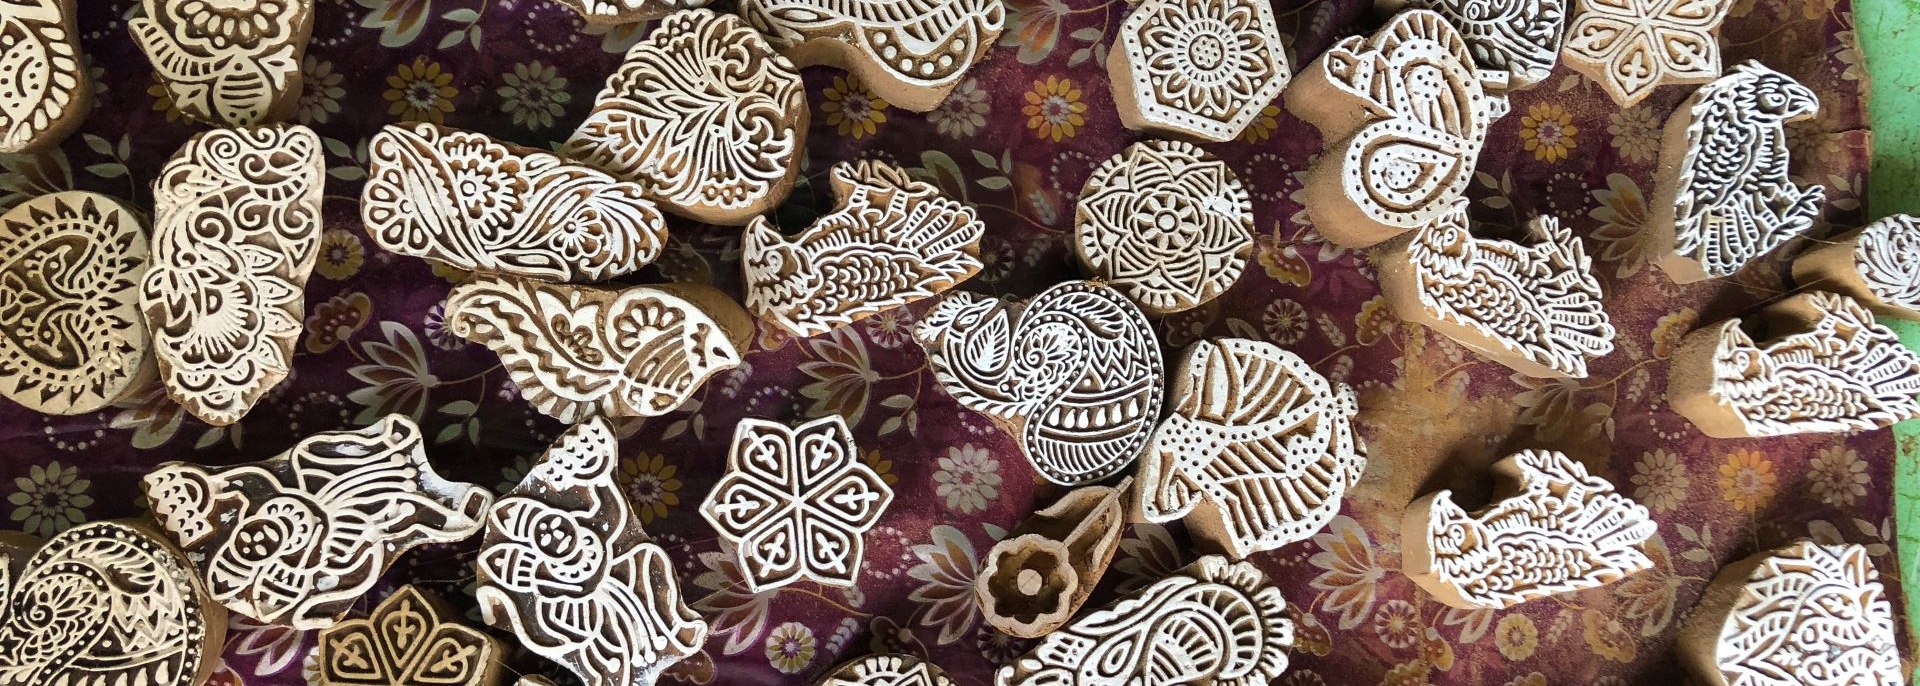 Small wood blocks for stamping cloth, with different designs of flowers, animals, paisleys and mandalas.